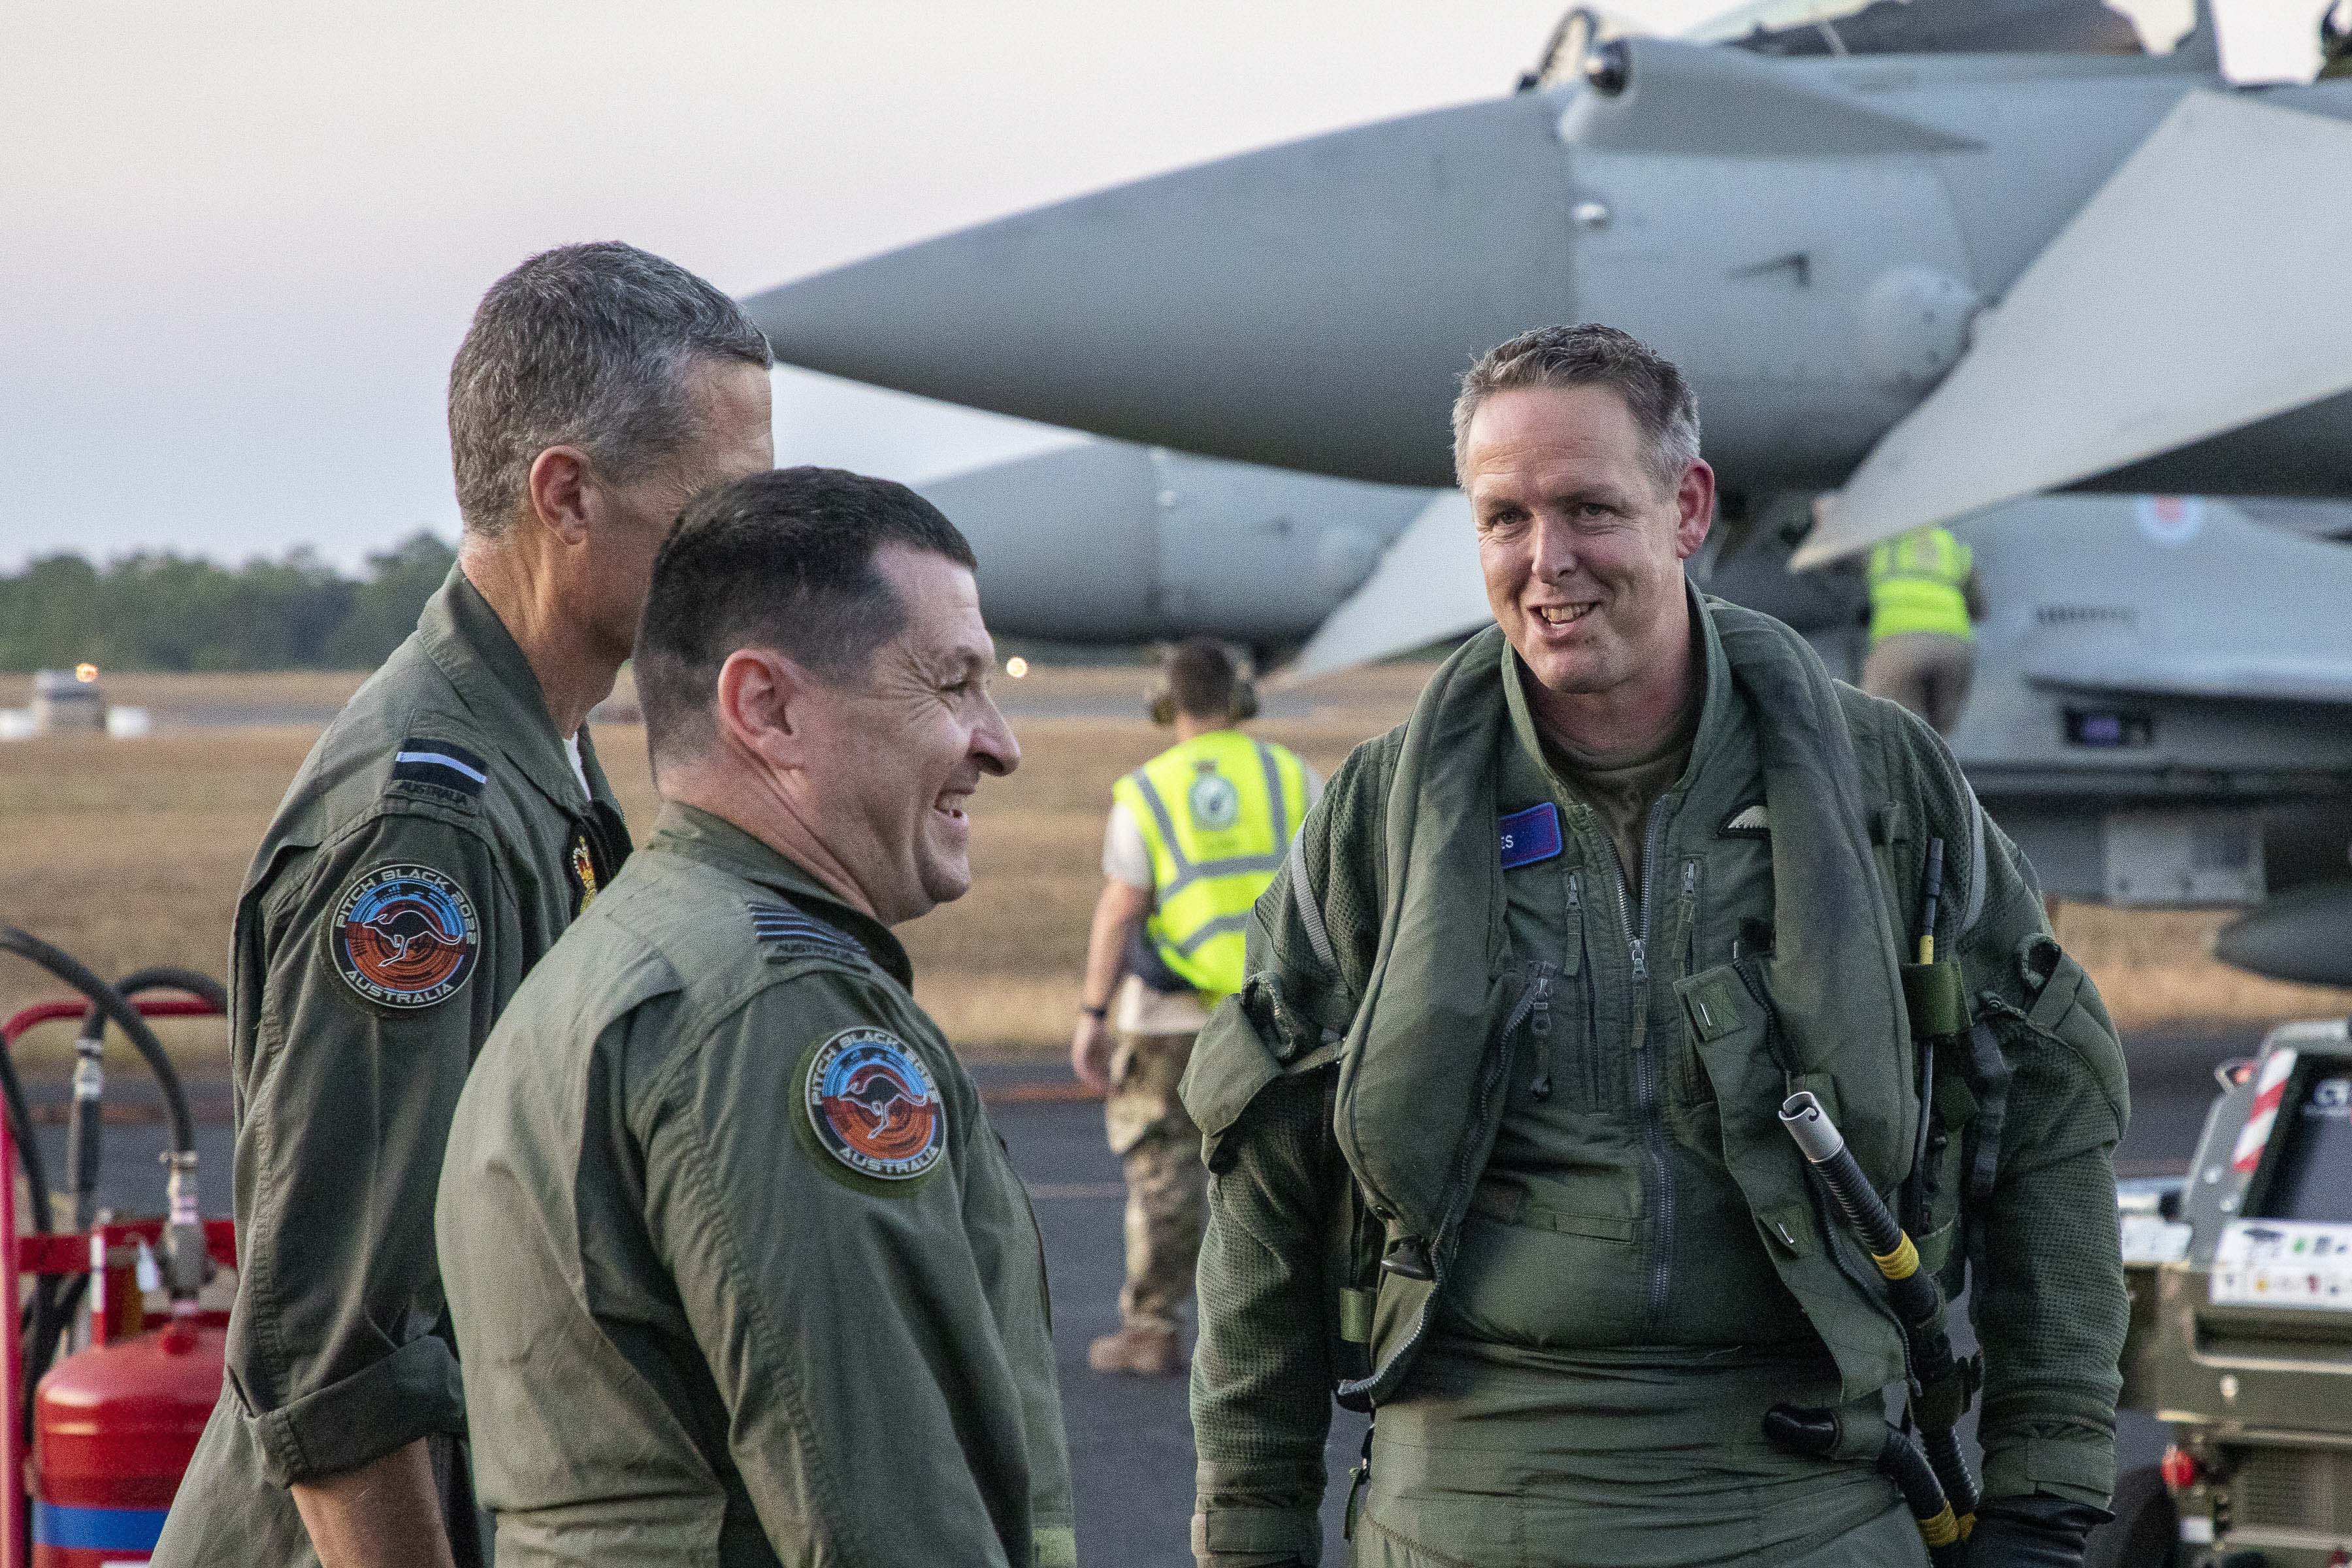 Image shows RAF aviators on the airfield with Typhoon aircraft in the background.